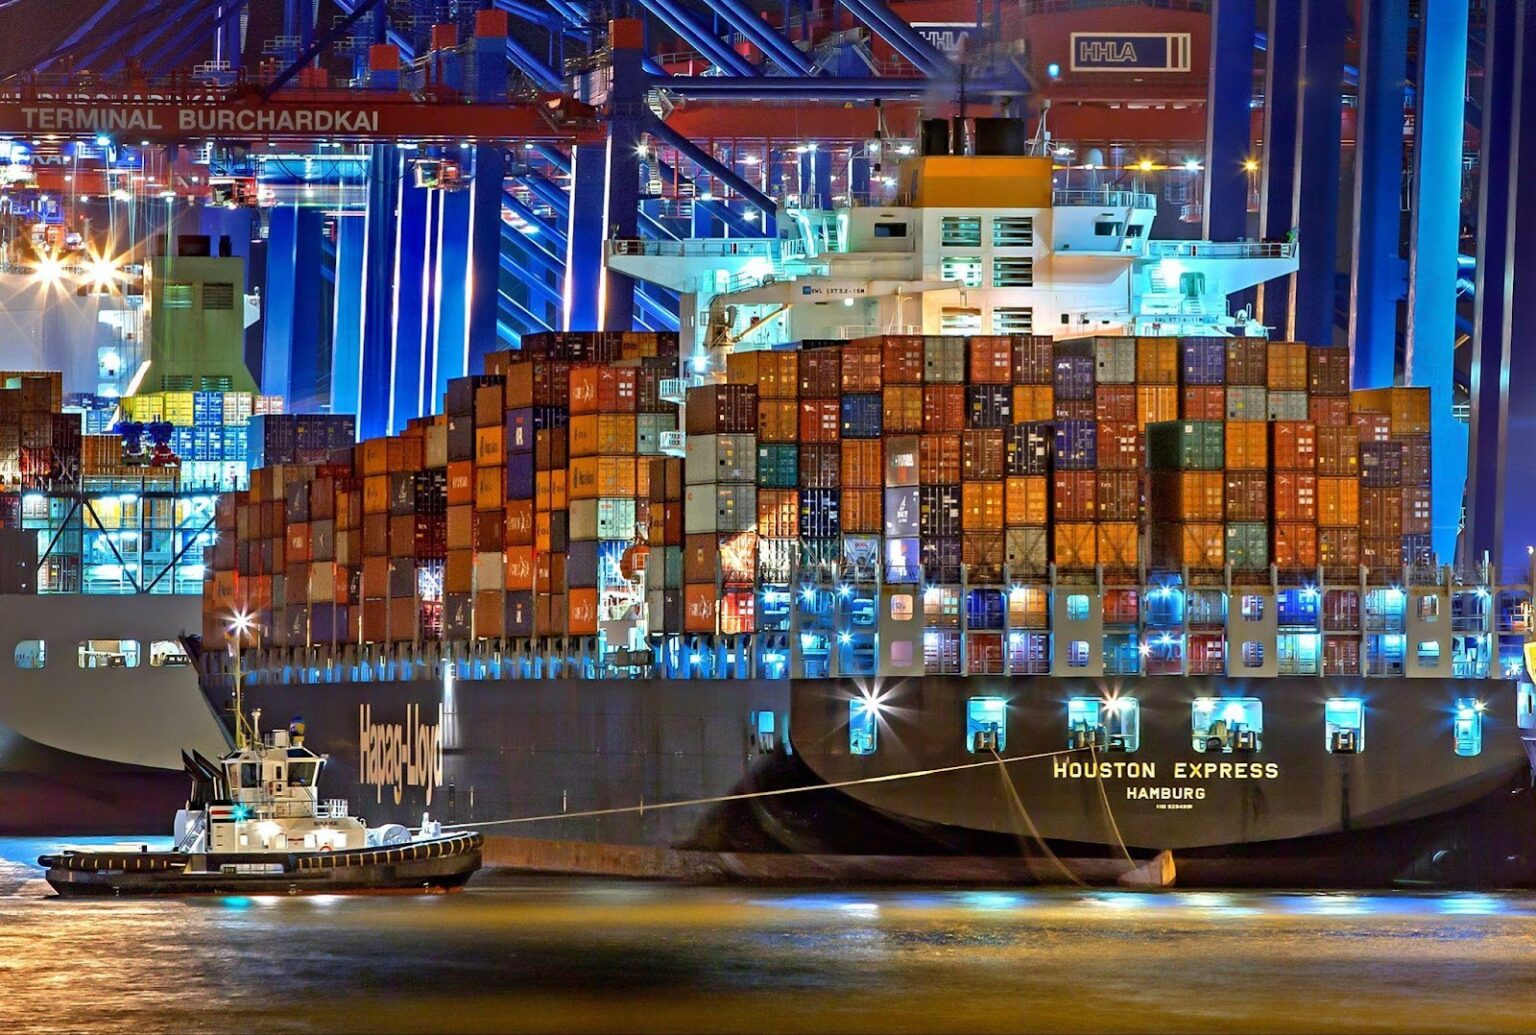 The Rise of E-commerce: How Shipping Companies are Adapting to Changing Consumer Habits